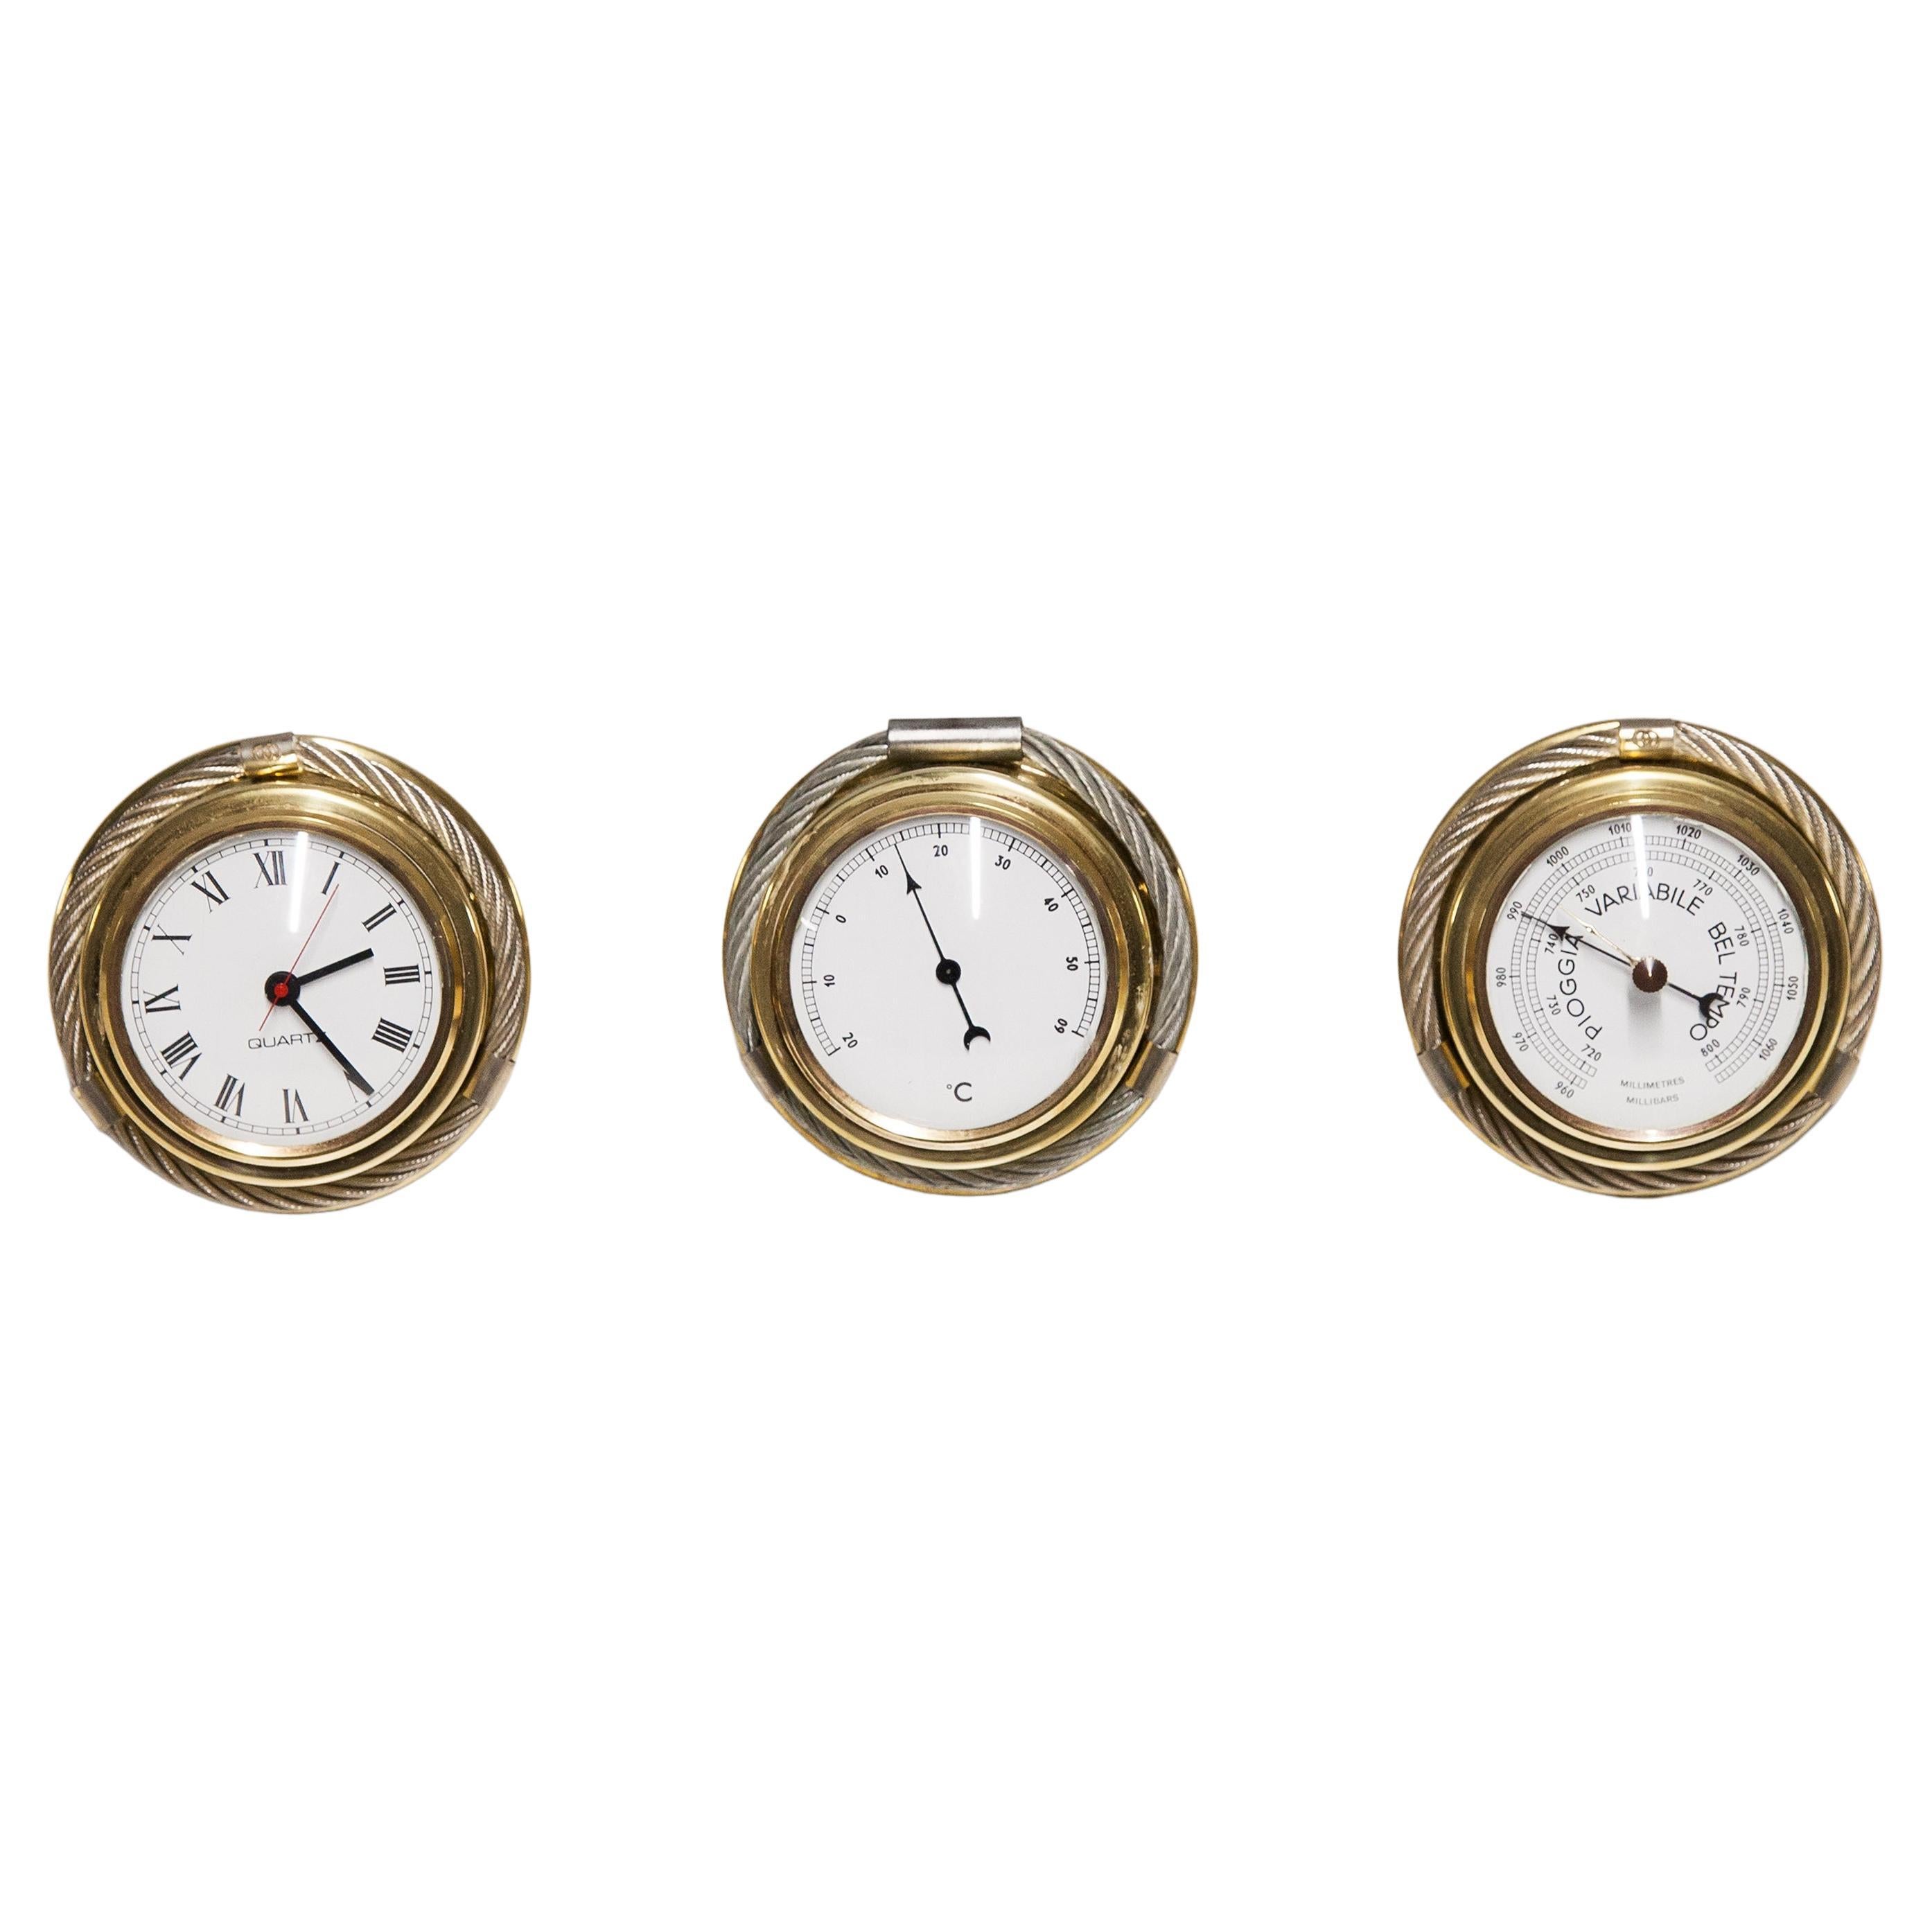 Gucci Vintage Thermometer Clock Air Meter 1970s Set of 3